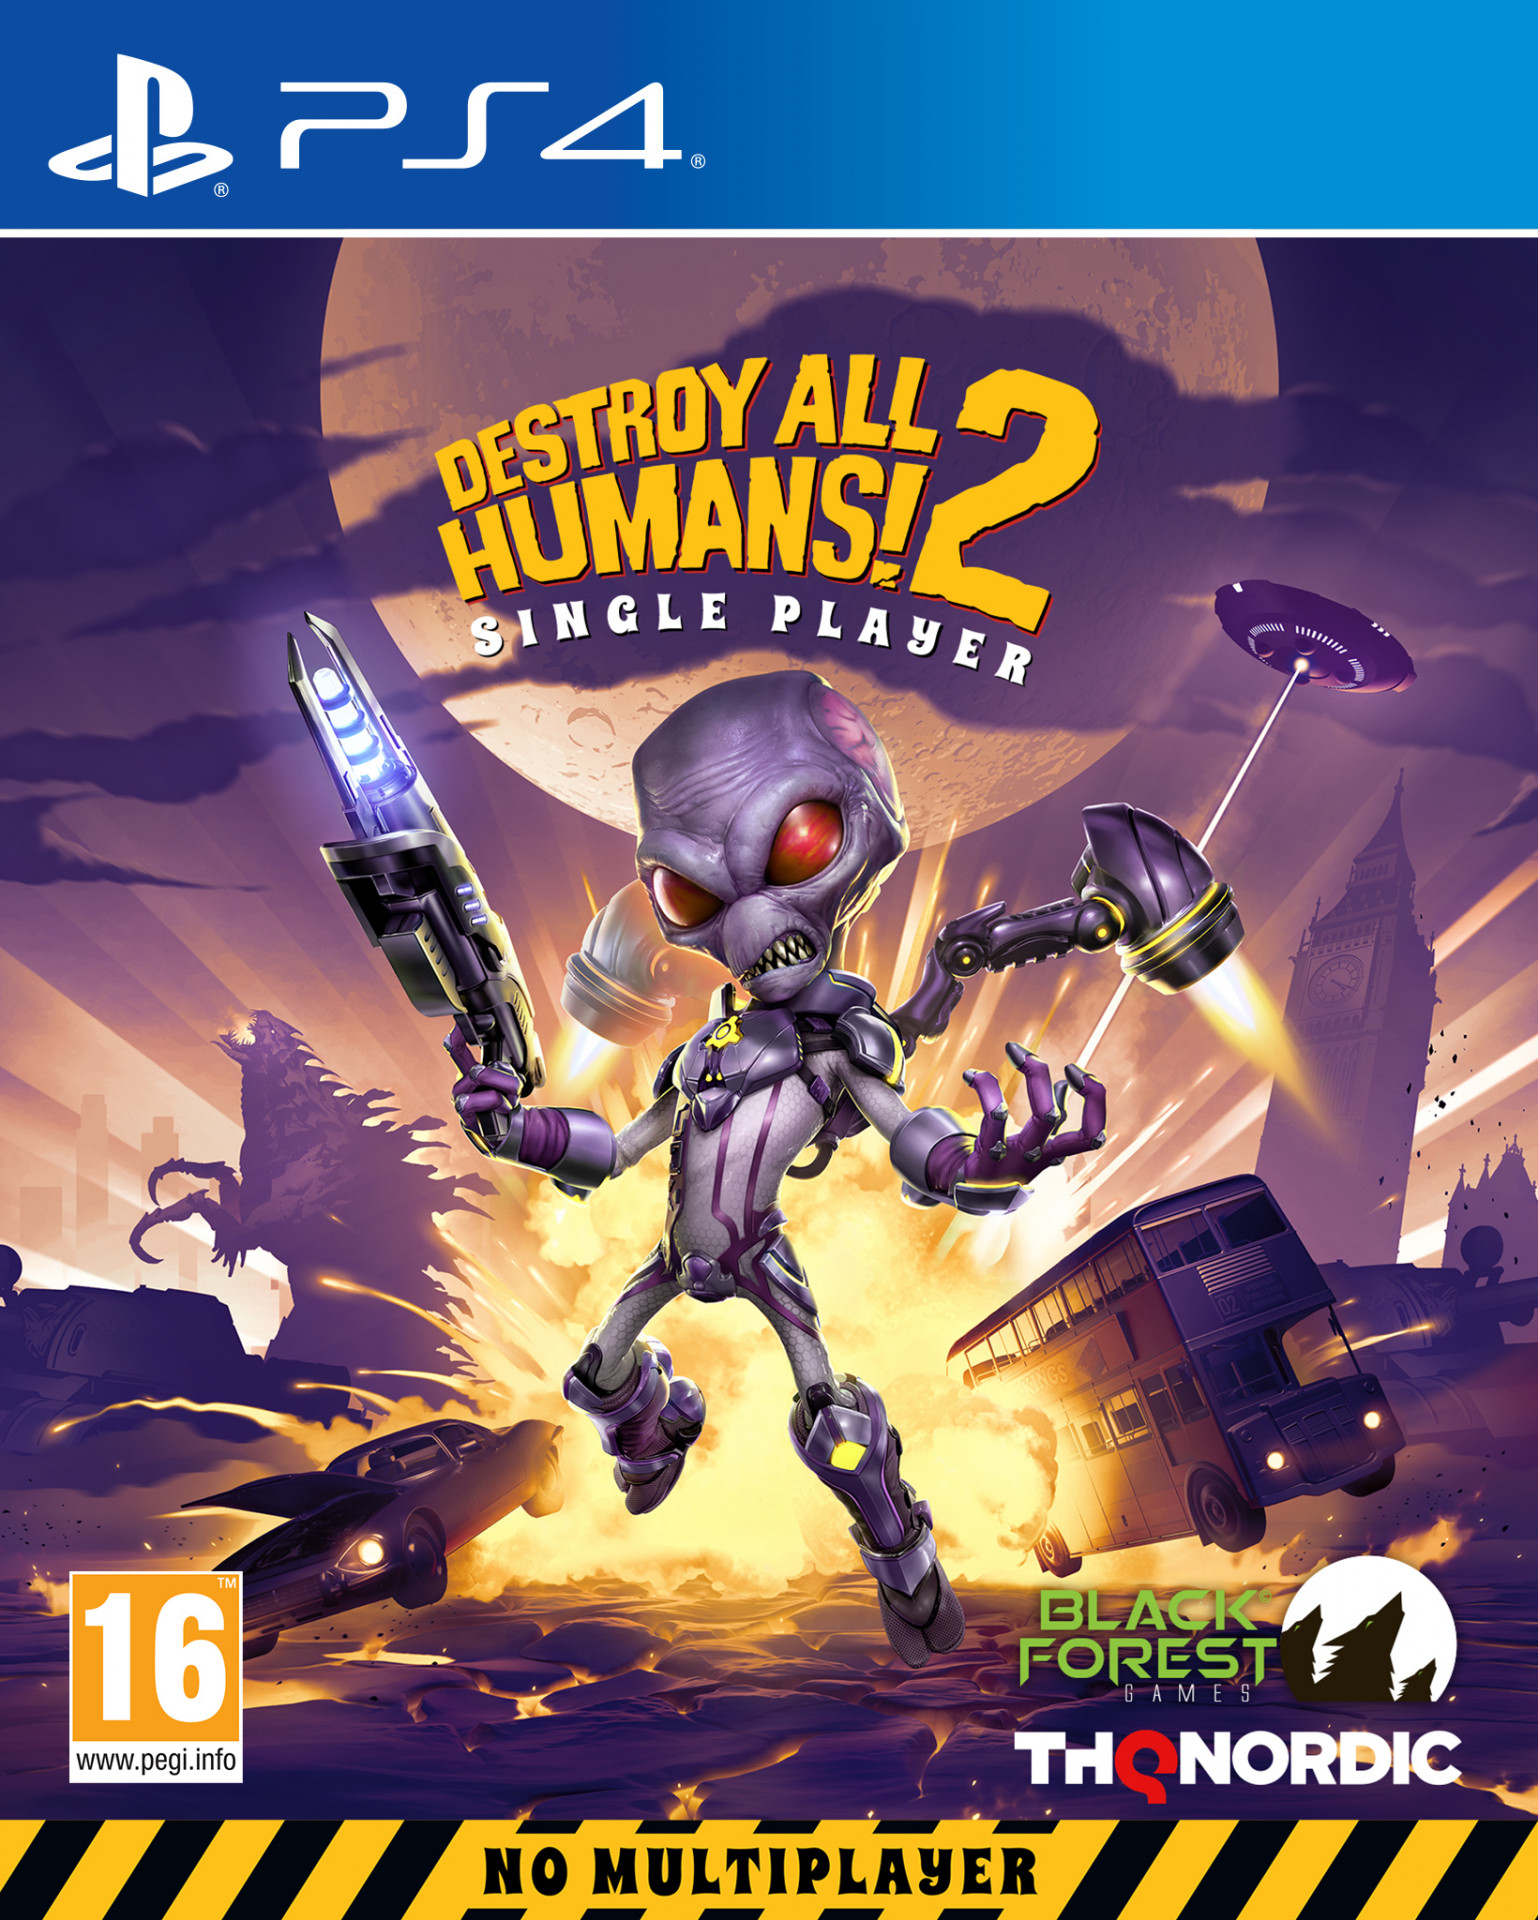 Destroy All Humans 2 - Single Player Edition (PS4), Black Forest